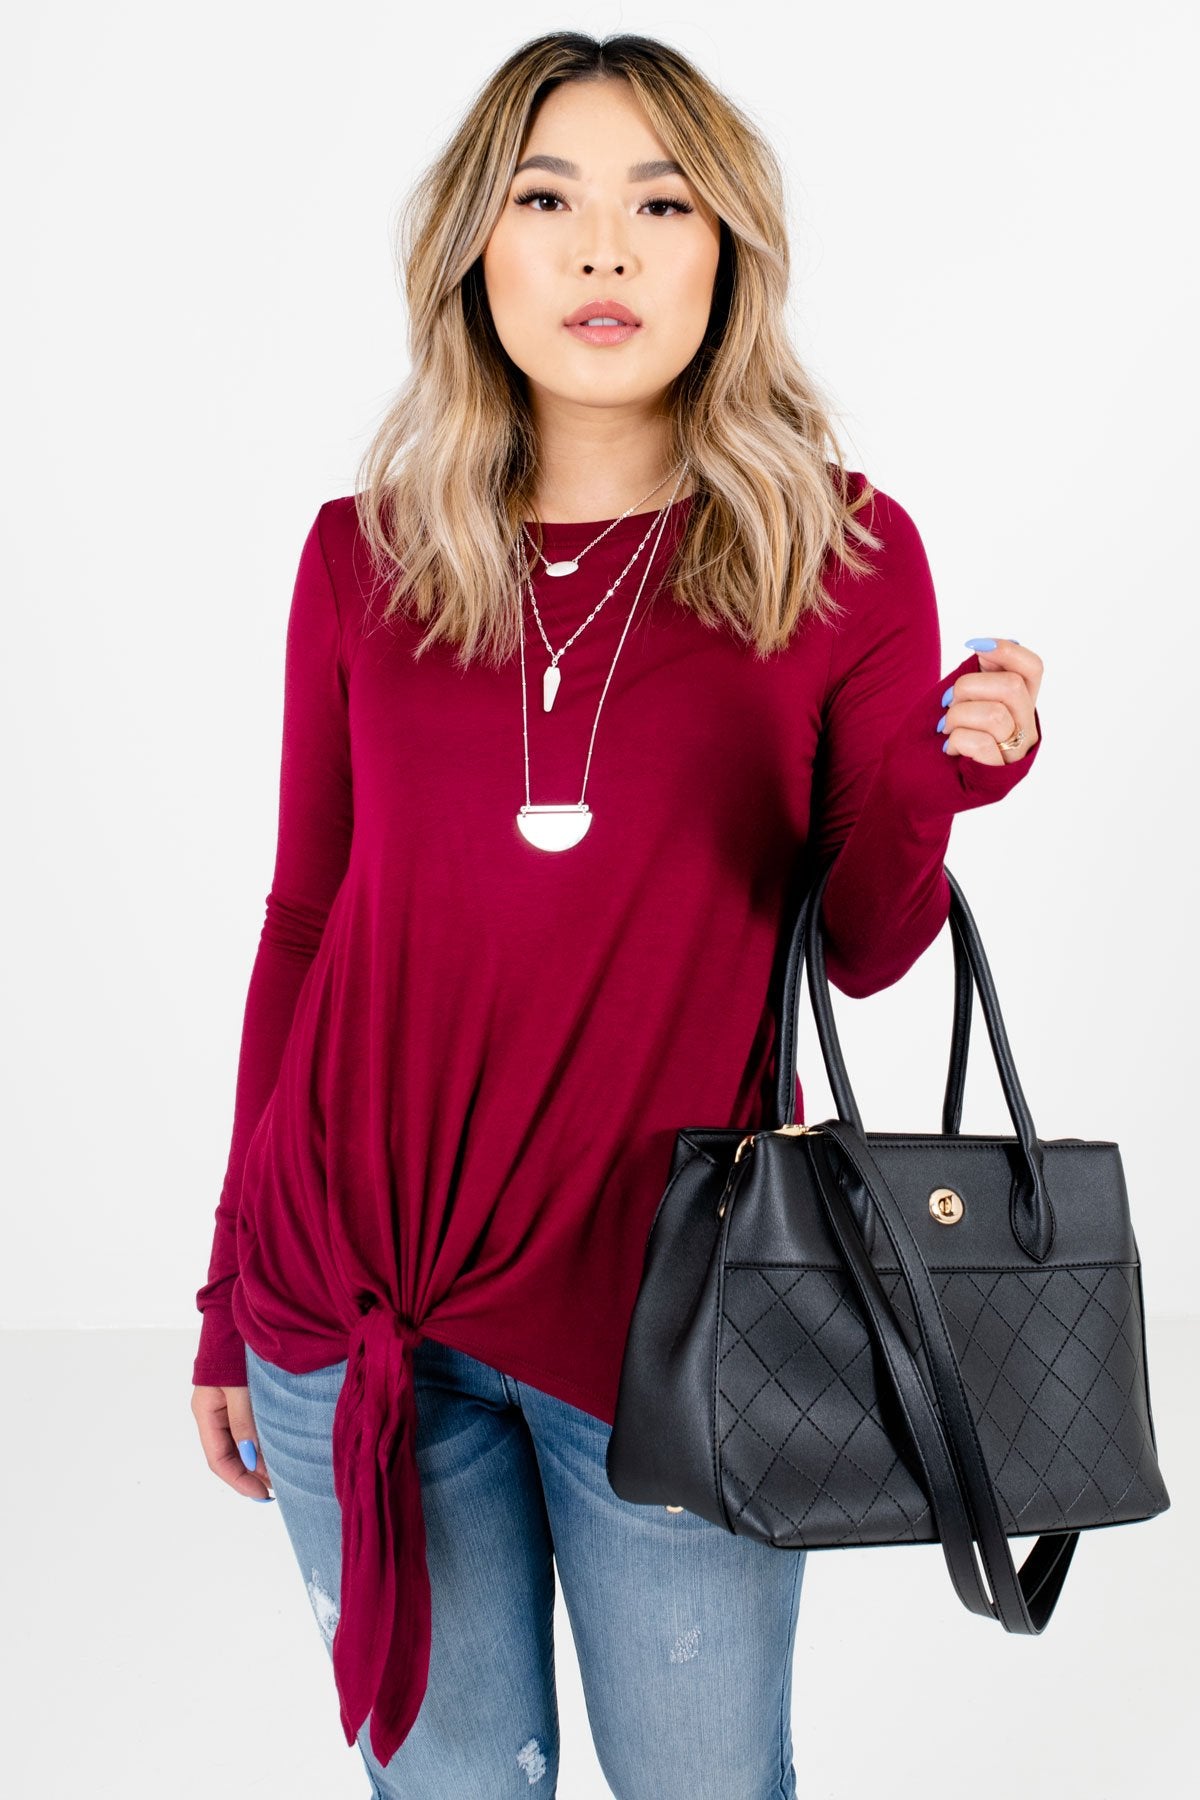 Burgundy Long Sleeve Boutique Tops for Women